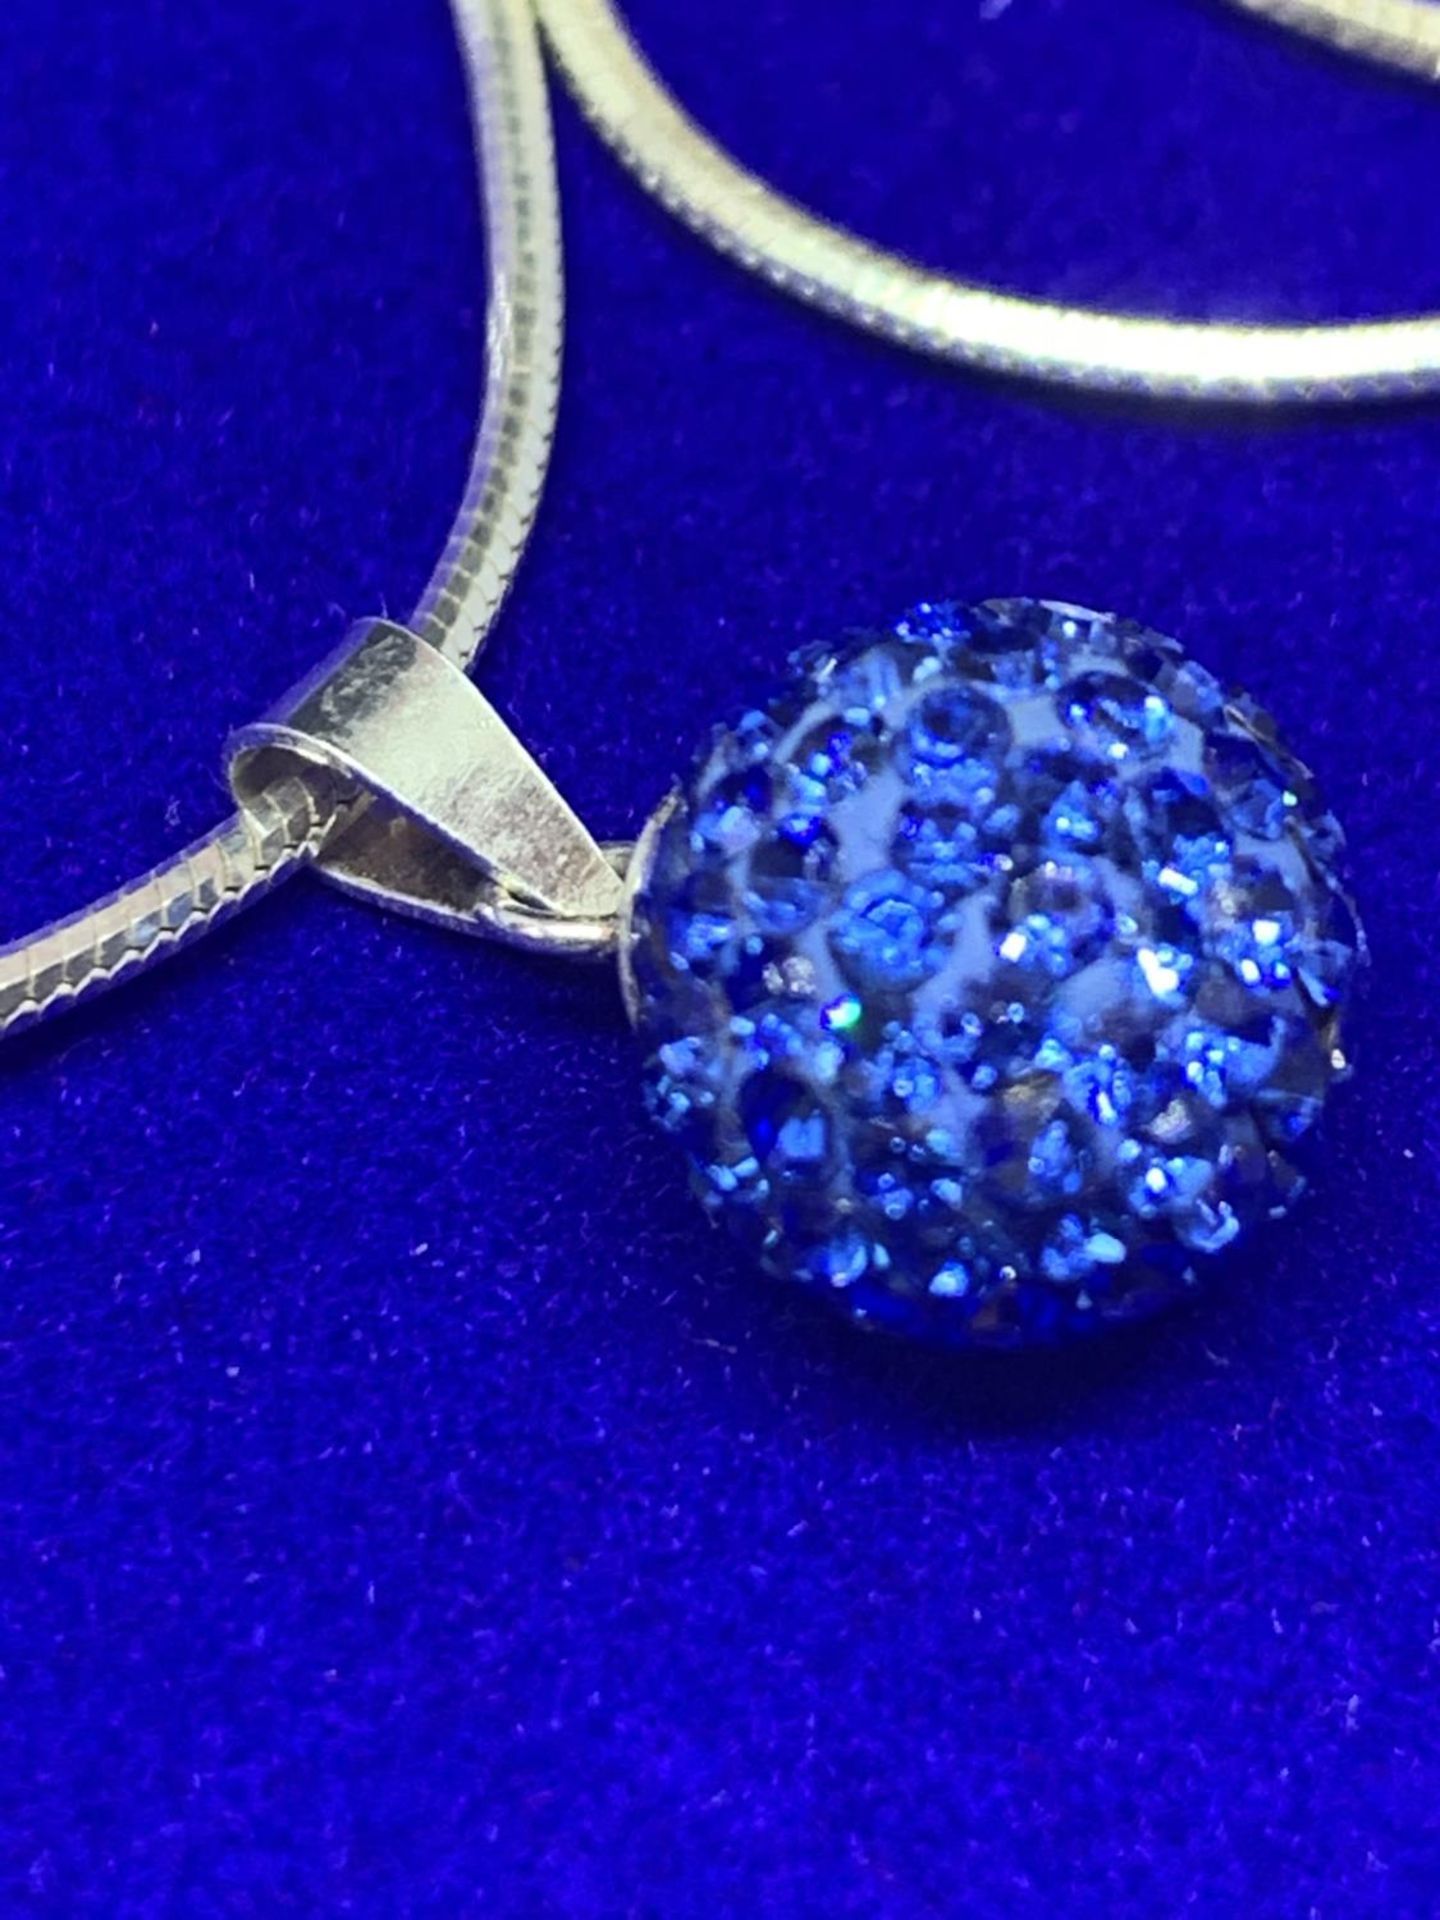 A SILVER CHAIN MARKED 925 WITH A BLUE CRYSTAL BALL PENDANT IN A PRESENTATION BOX - Image 2 of 3